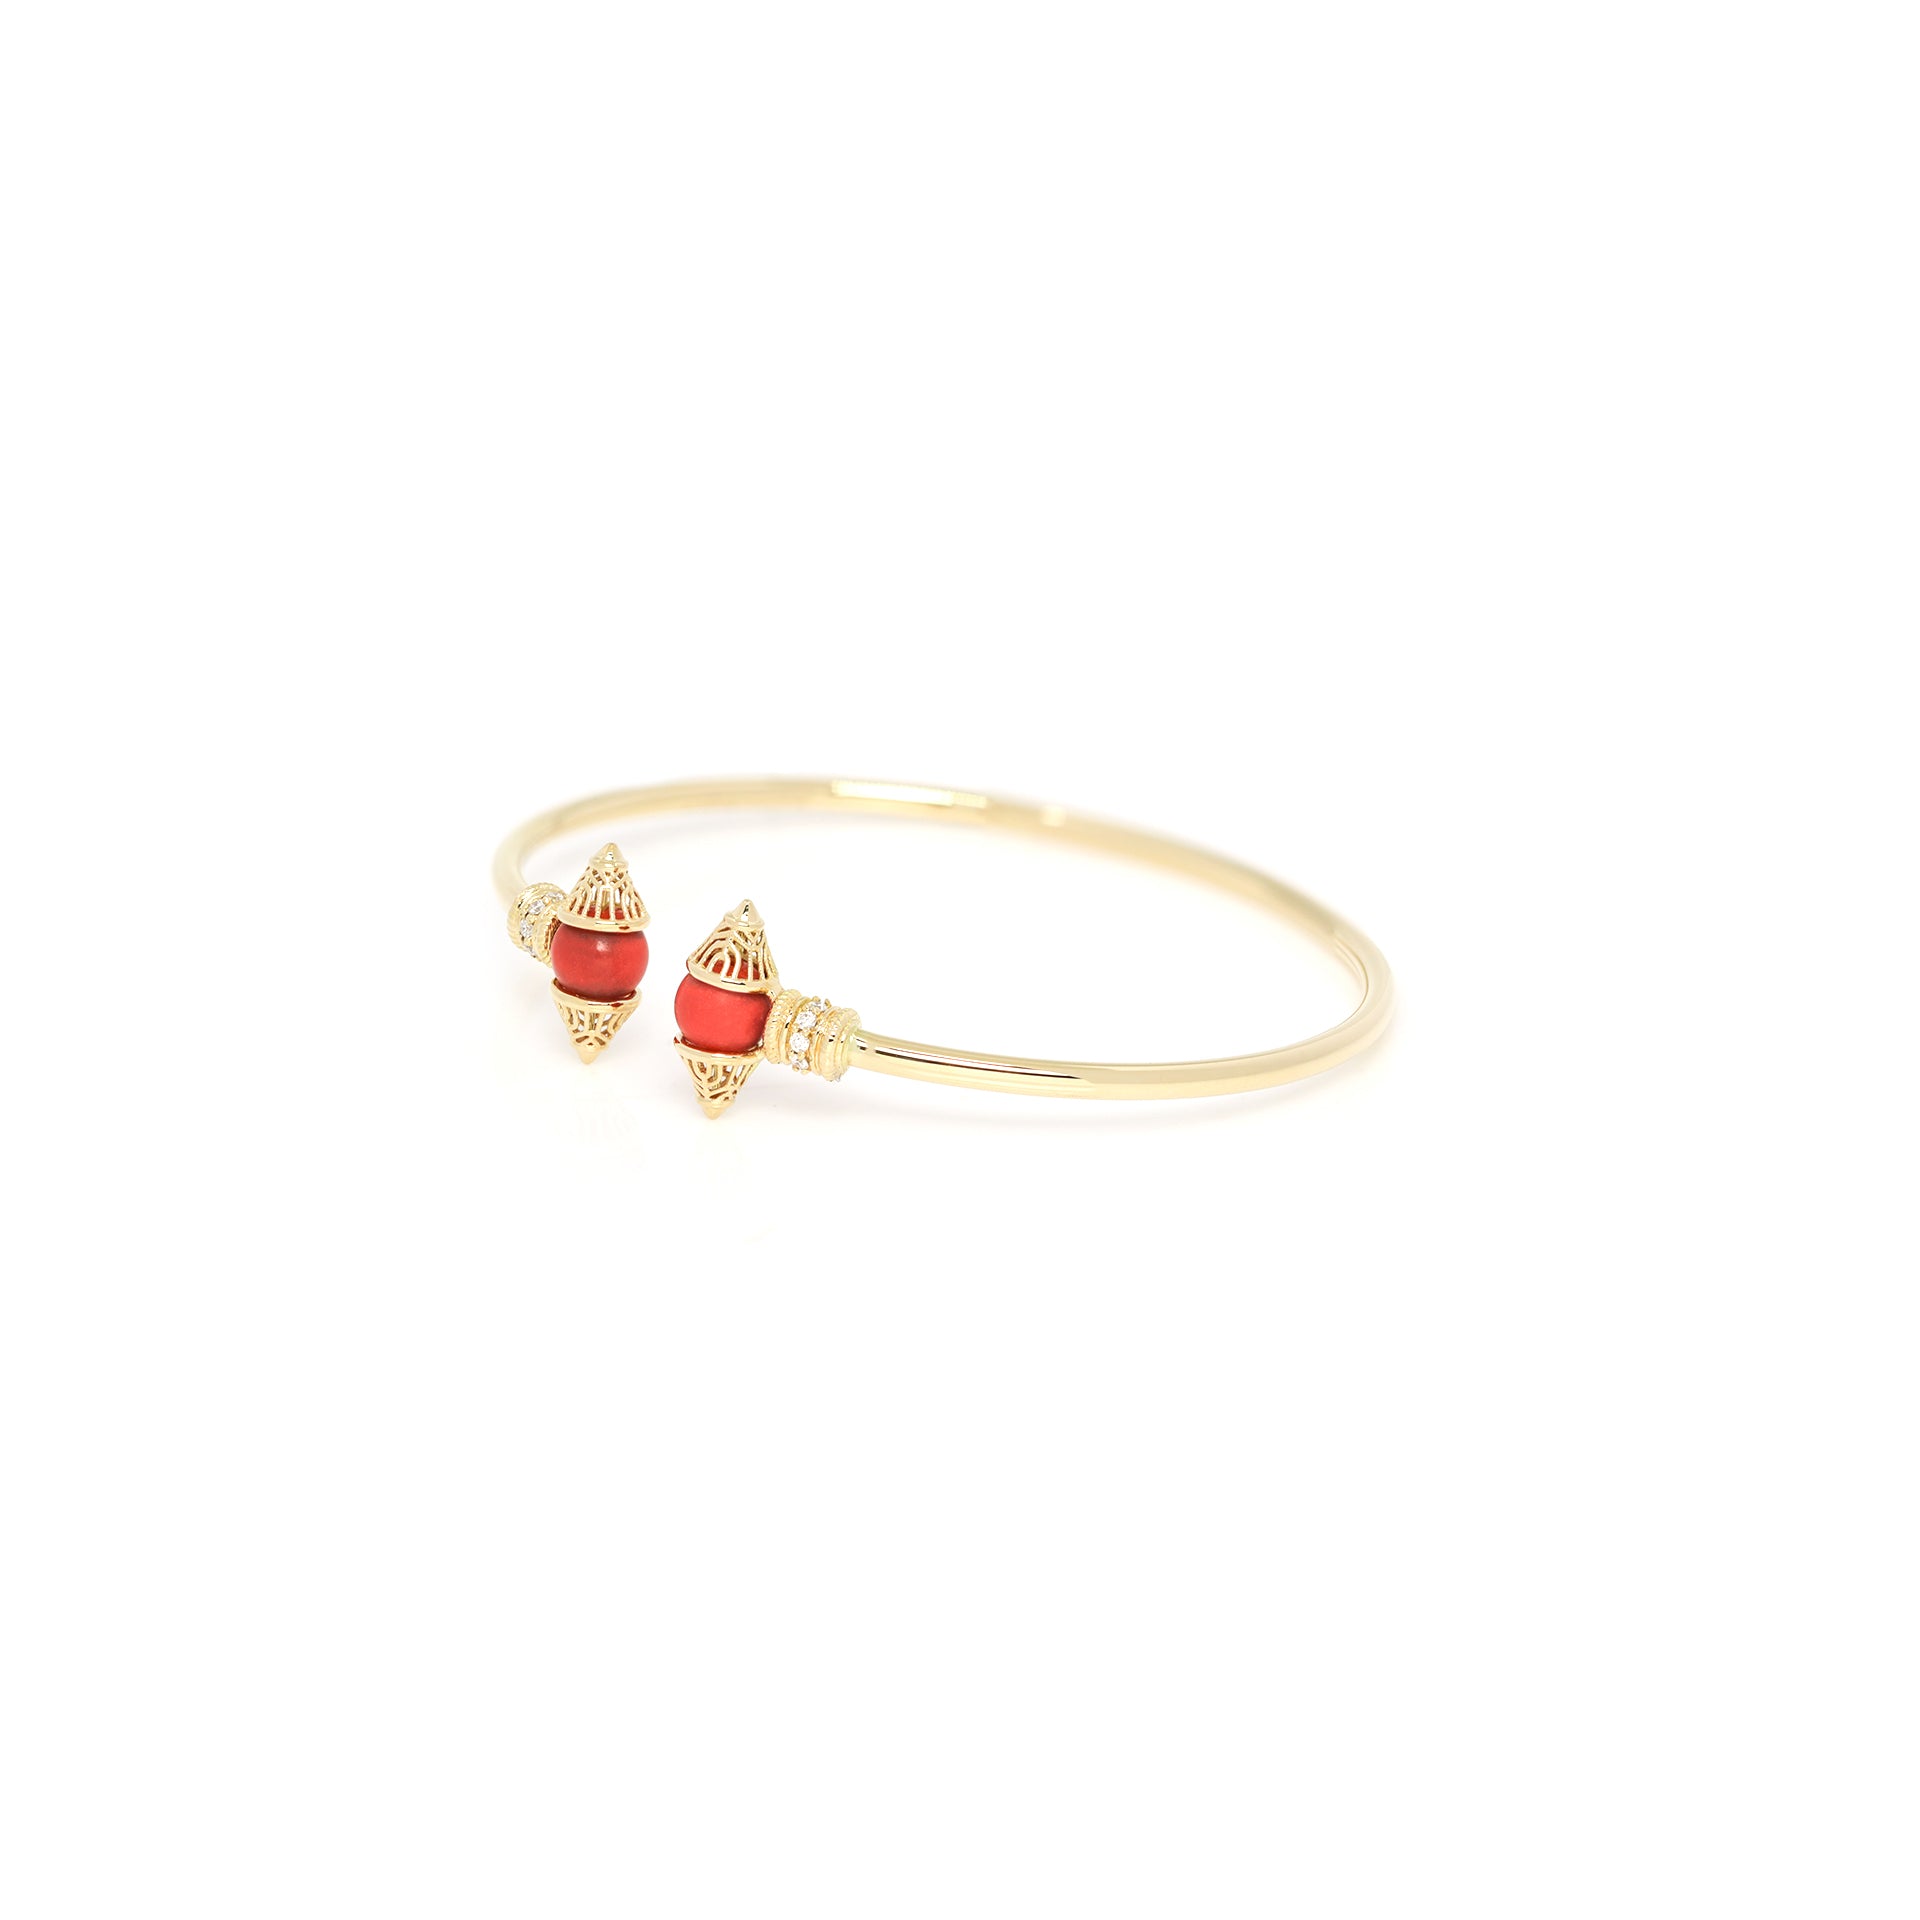 Al Merriyah moods colour Bangle in 18k gold with Coral and Diamonds